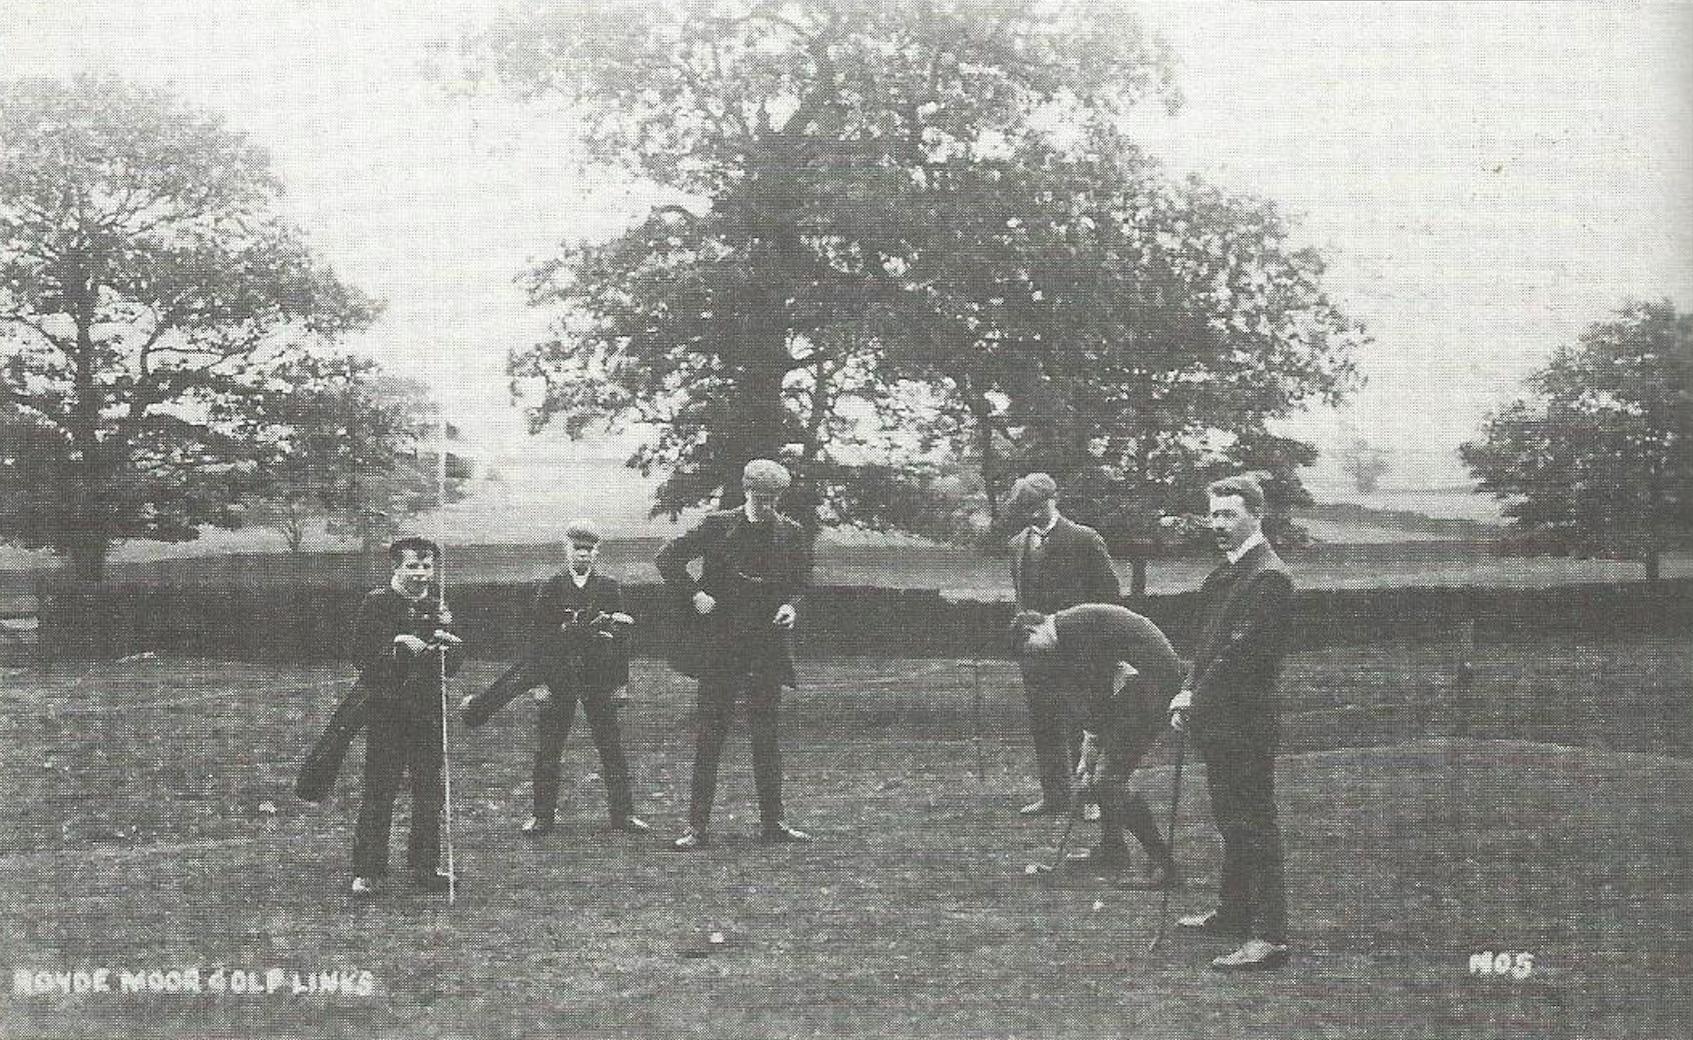 Teeing off at Royd Moor Golf Club, which only existed for eight years from 1905 to 1913. 